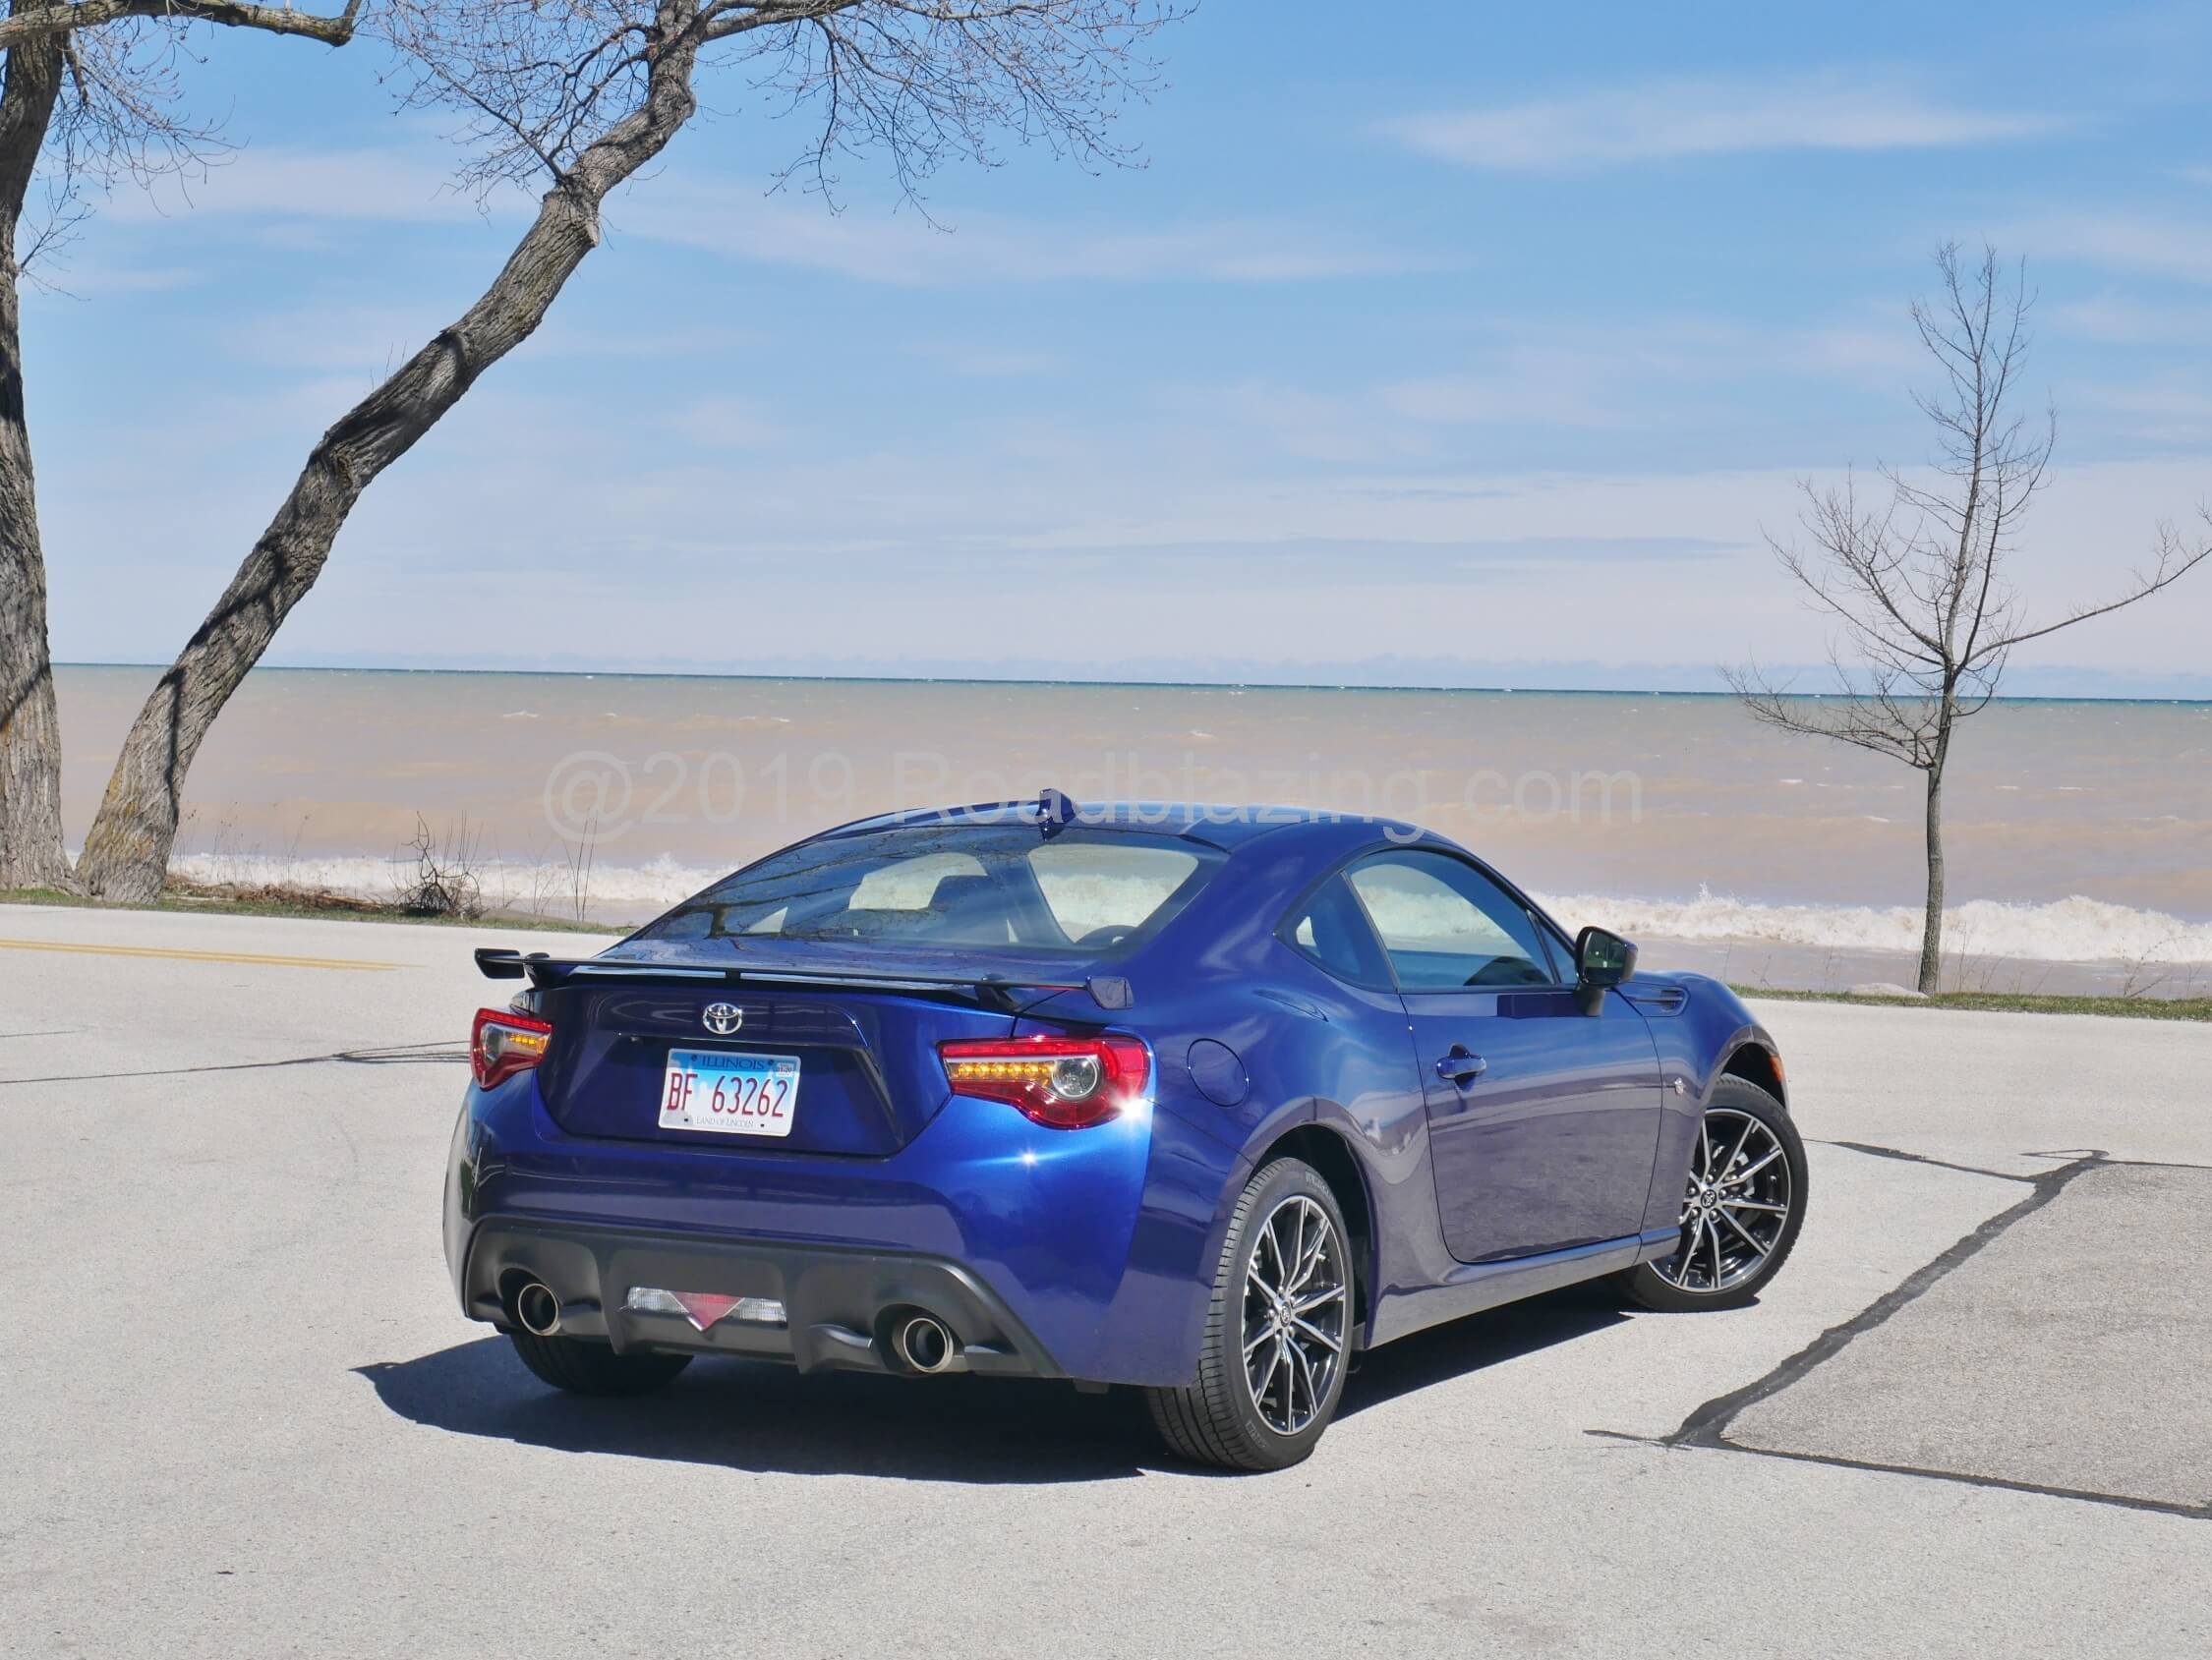 2019 Toyota 86 GT: Oceanic Blue watches stormy surf of Milwaukee's Lake Michigan shoreline, fitted with trunk-lid aero wing and amber LED rear directionals